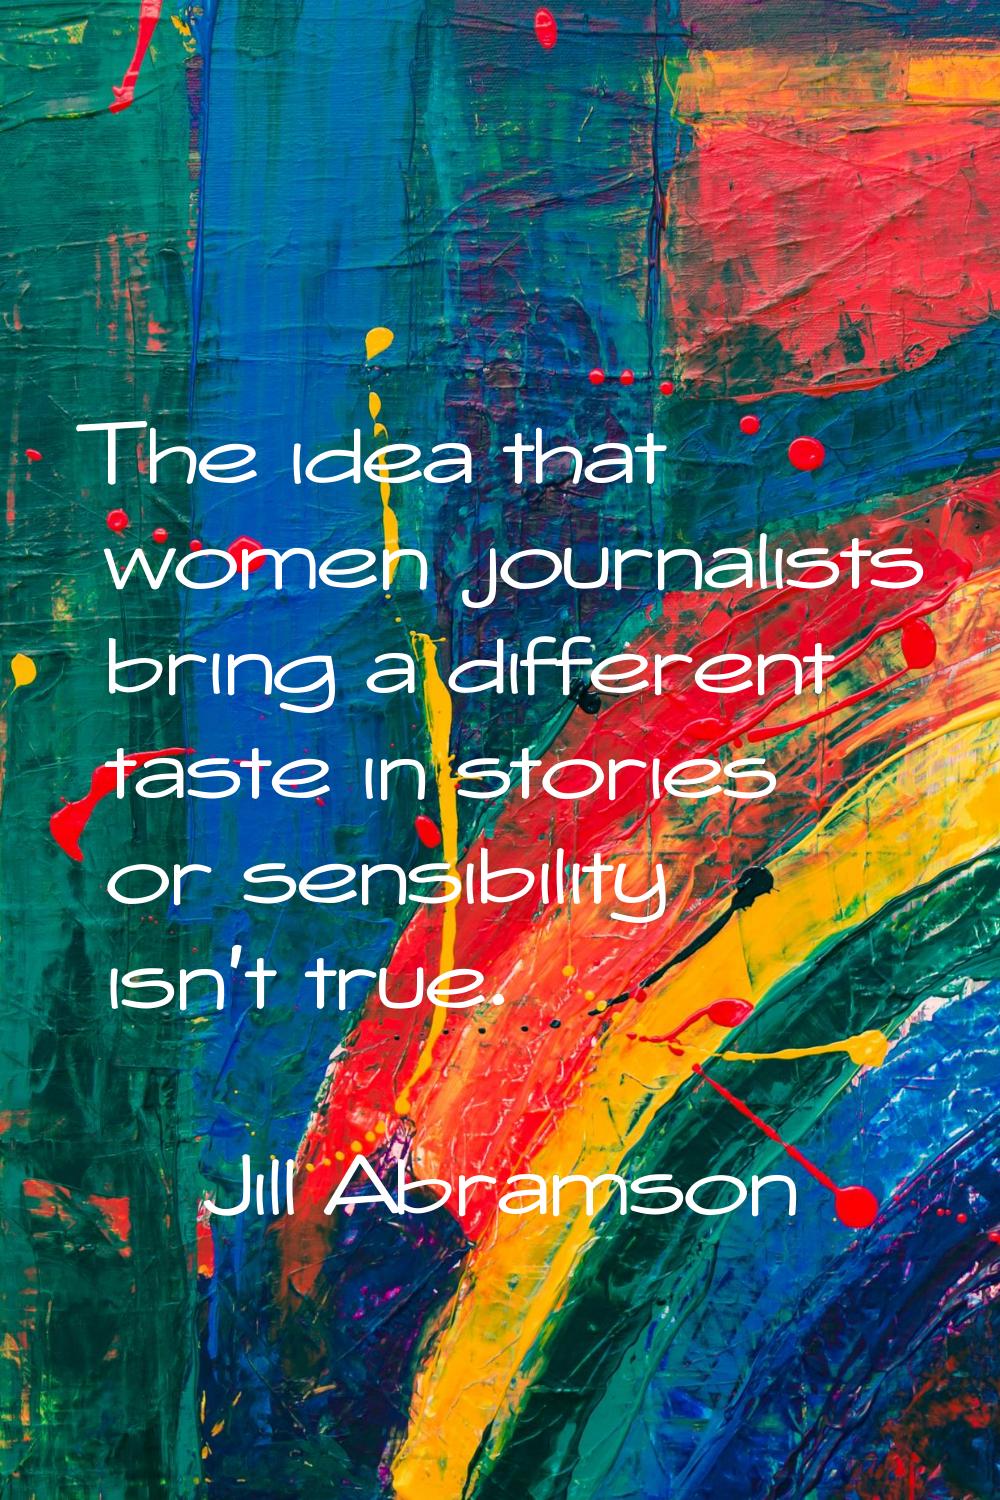 The idea that women journalists bring a different taste in stories or sensibility isn't true.